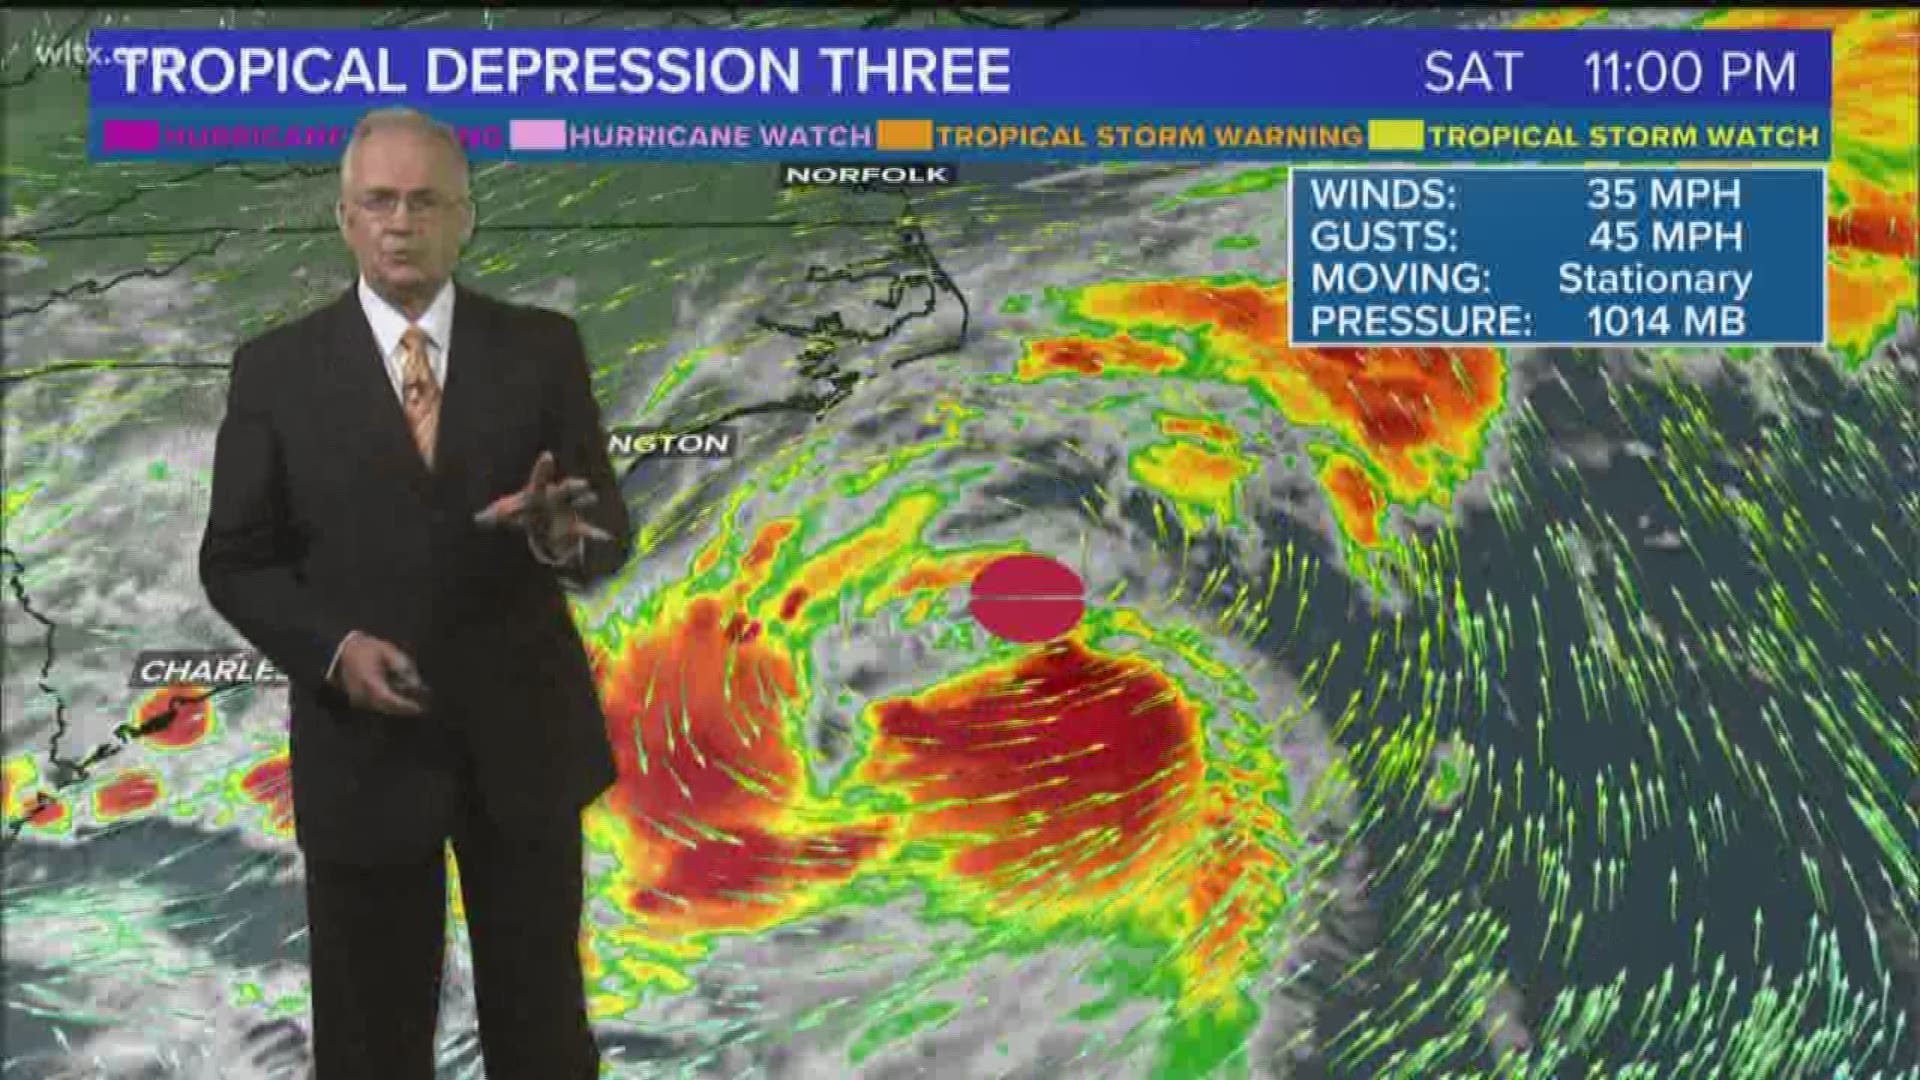 News19 Chief Meteorologist Jim Gandy provides an update on Tropical Depression Three.